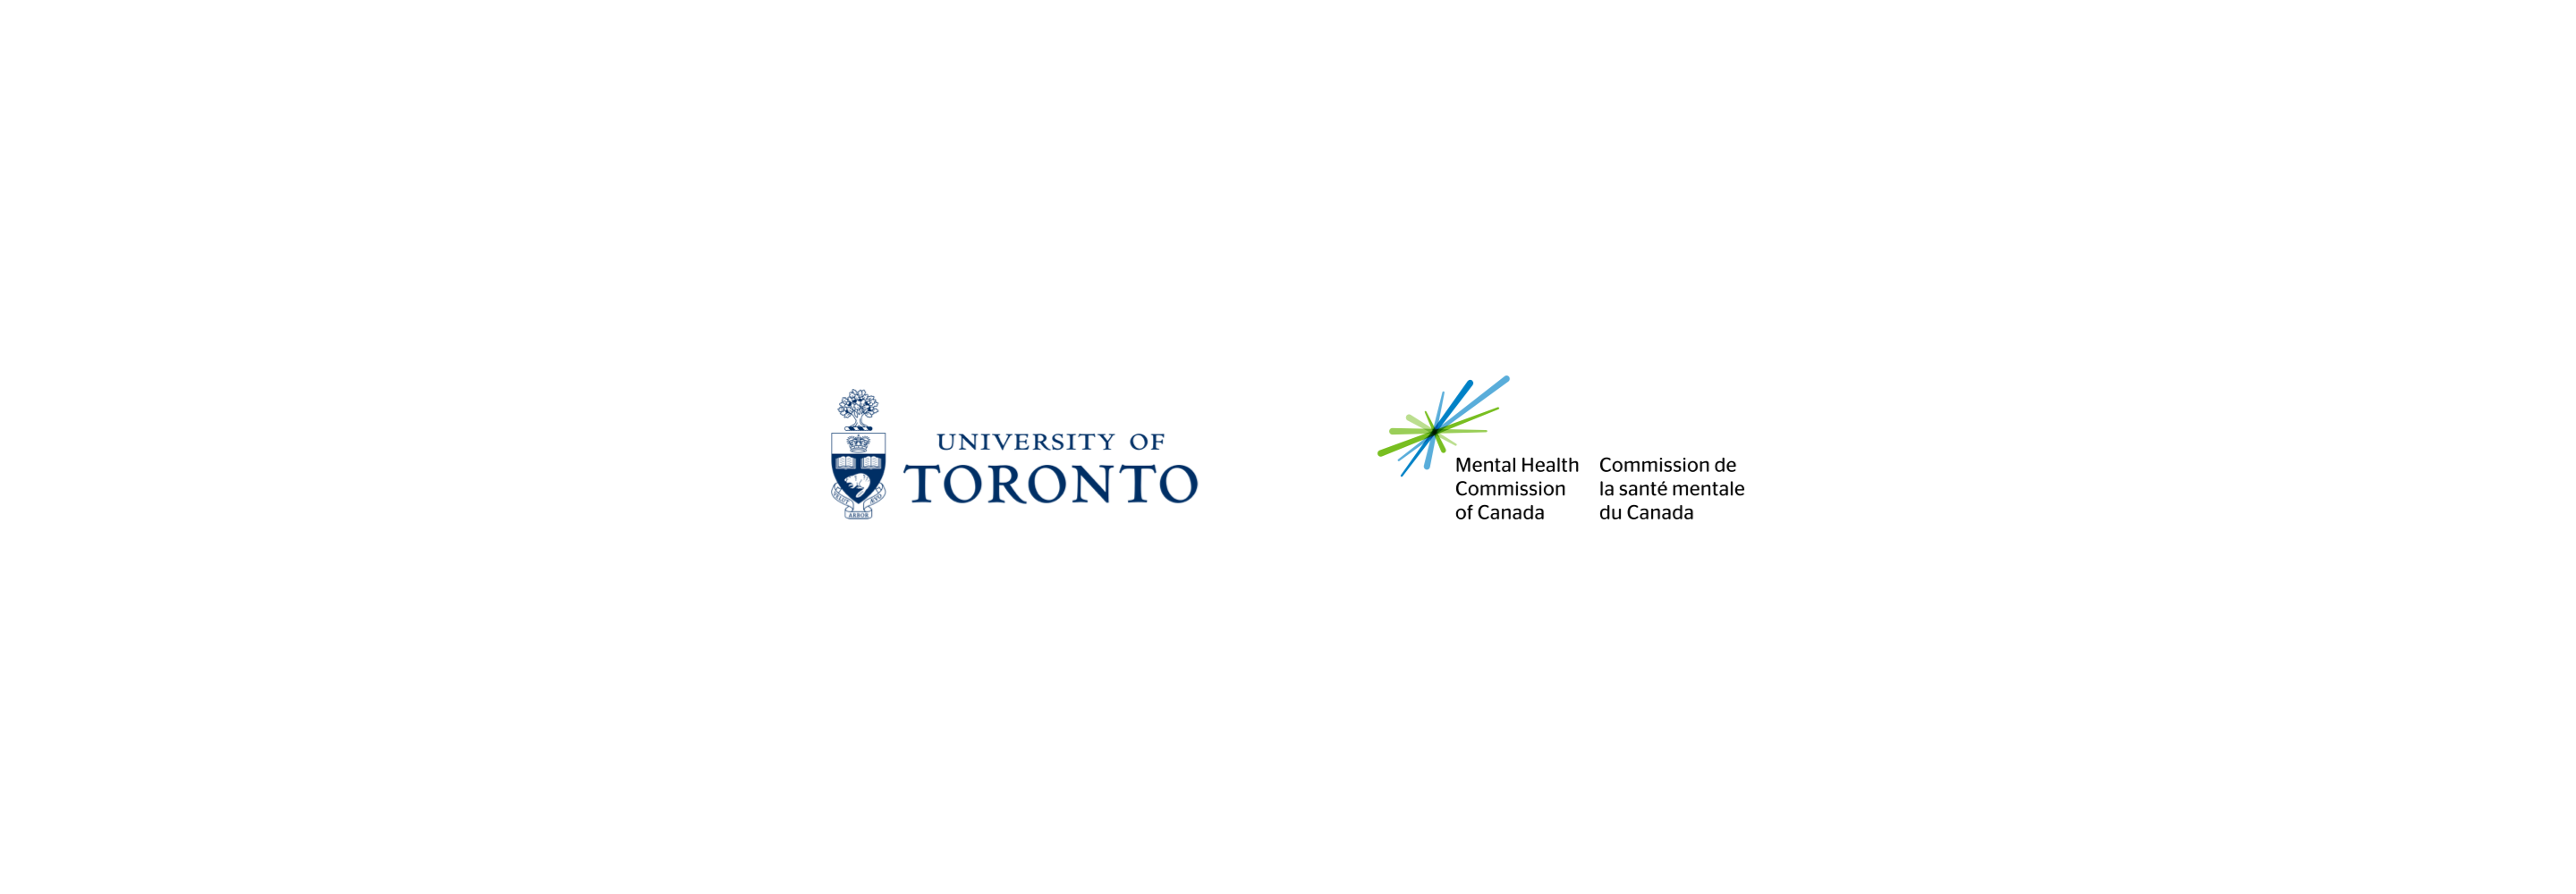 UofT and  Mental Health Commission of Canada logos